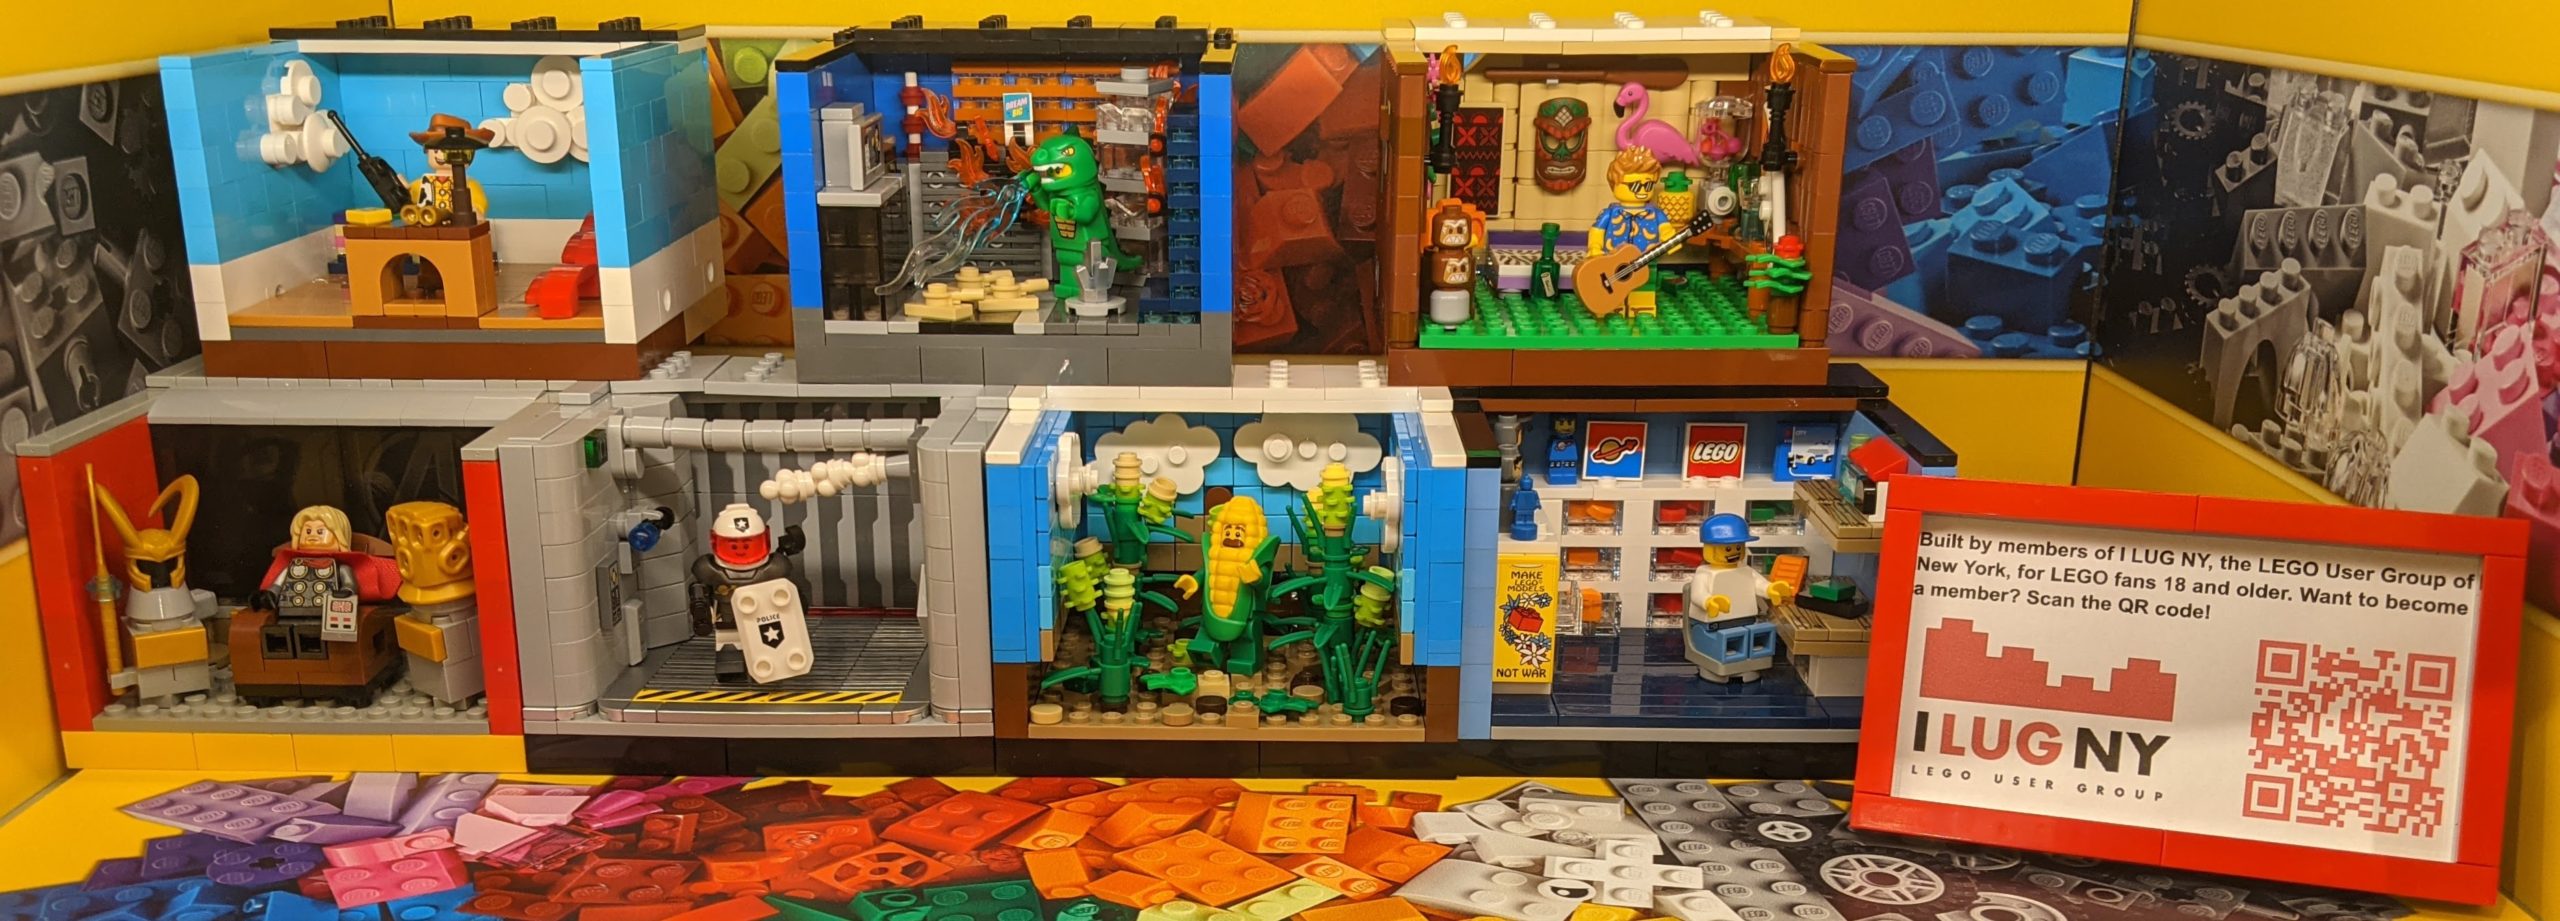 Lego Store display window for Christmas at Alderwood, Mall…